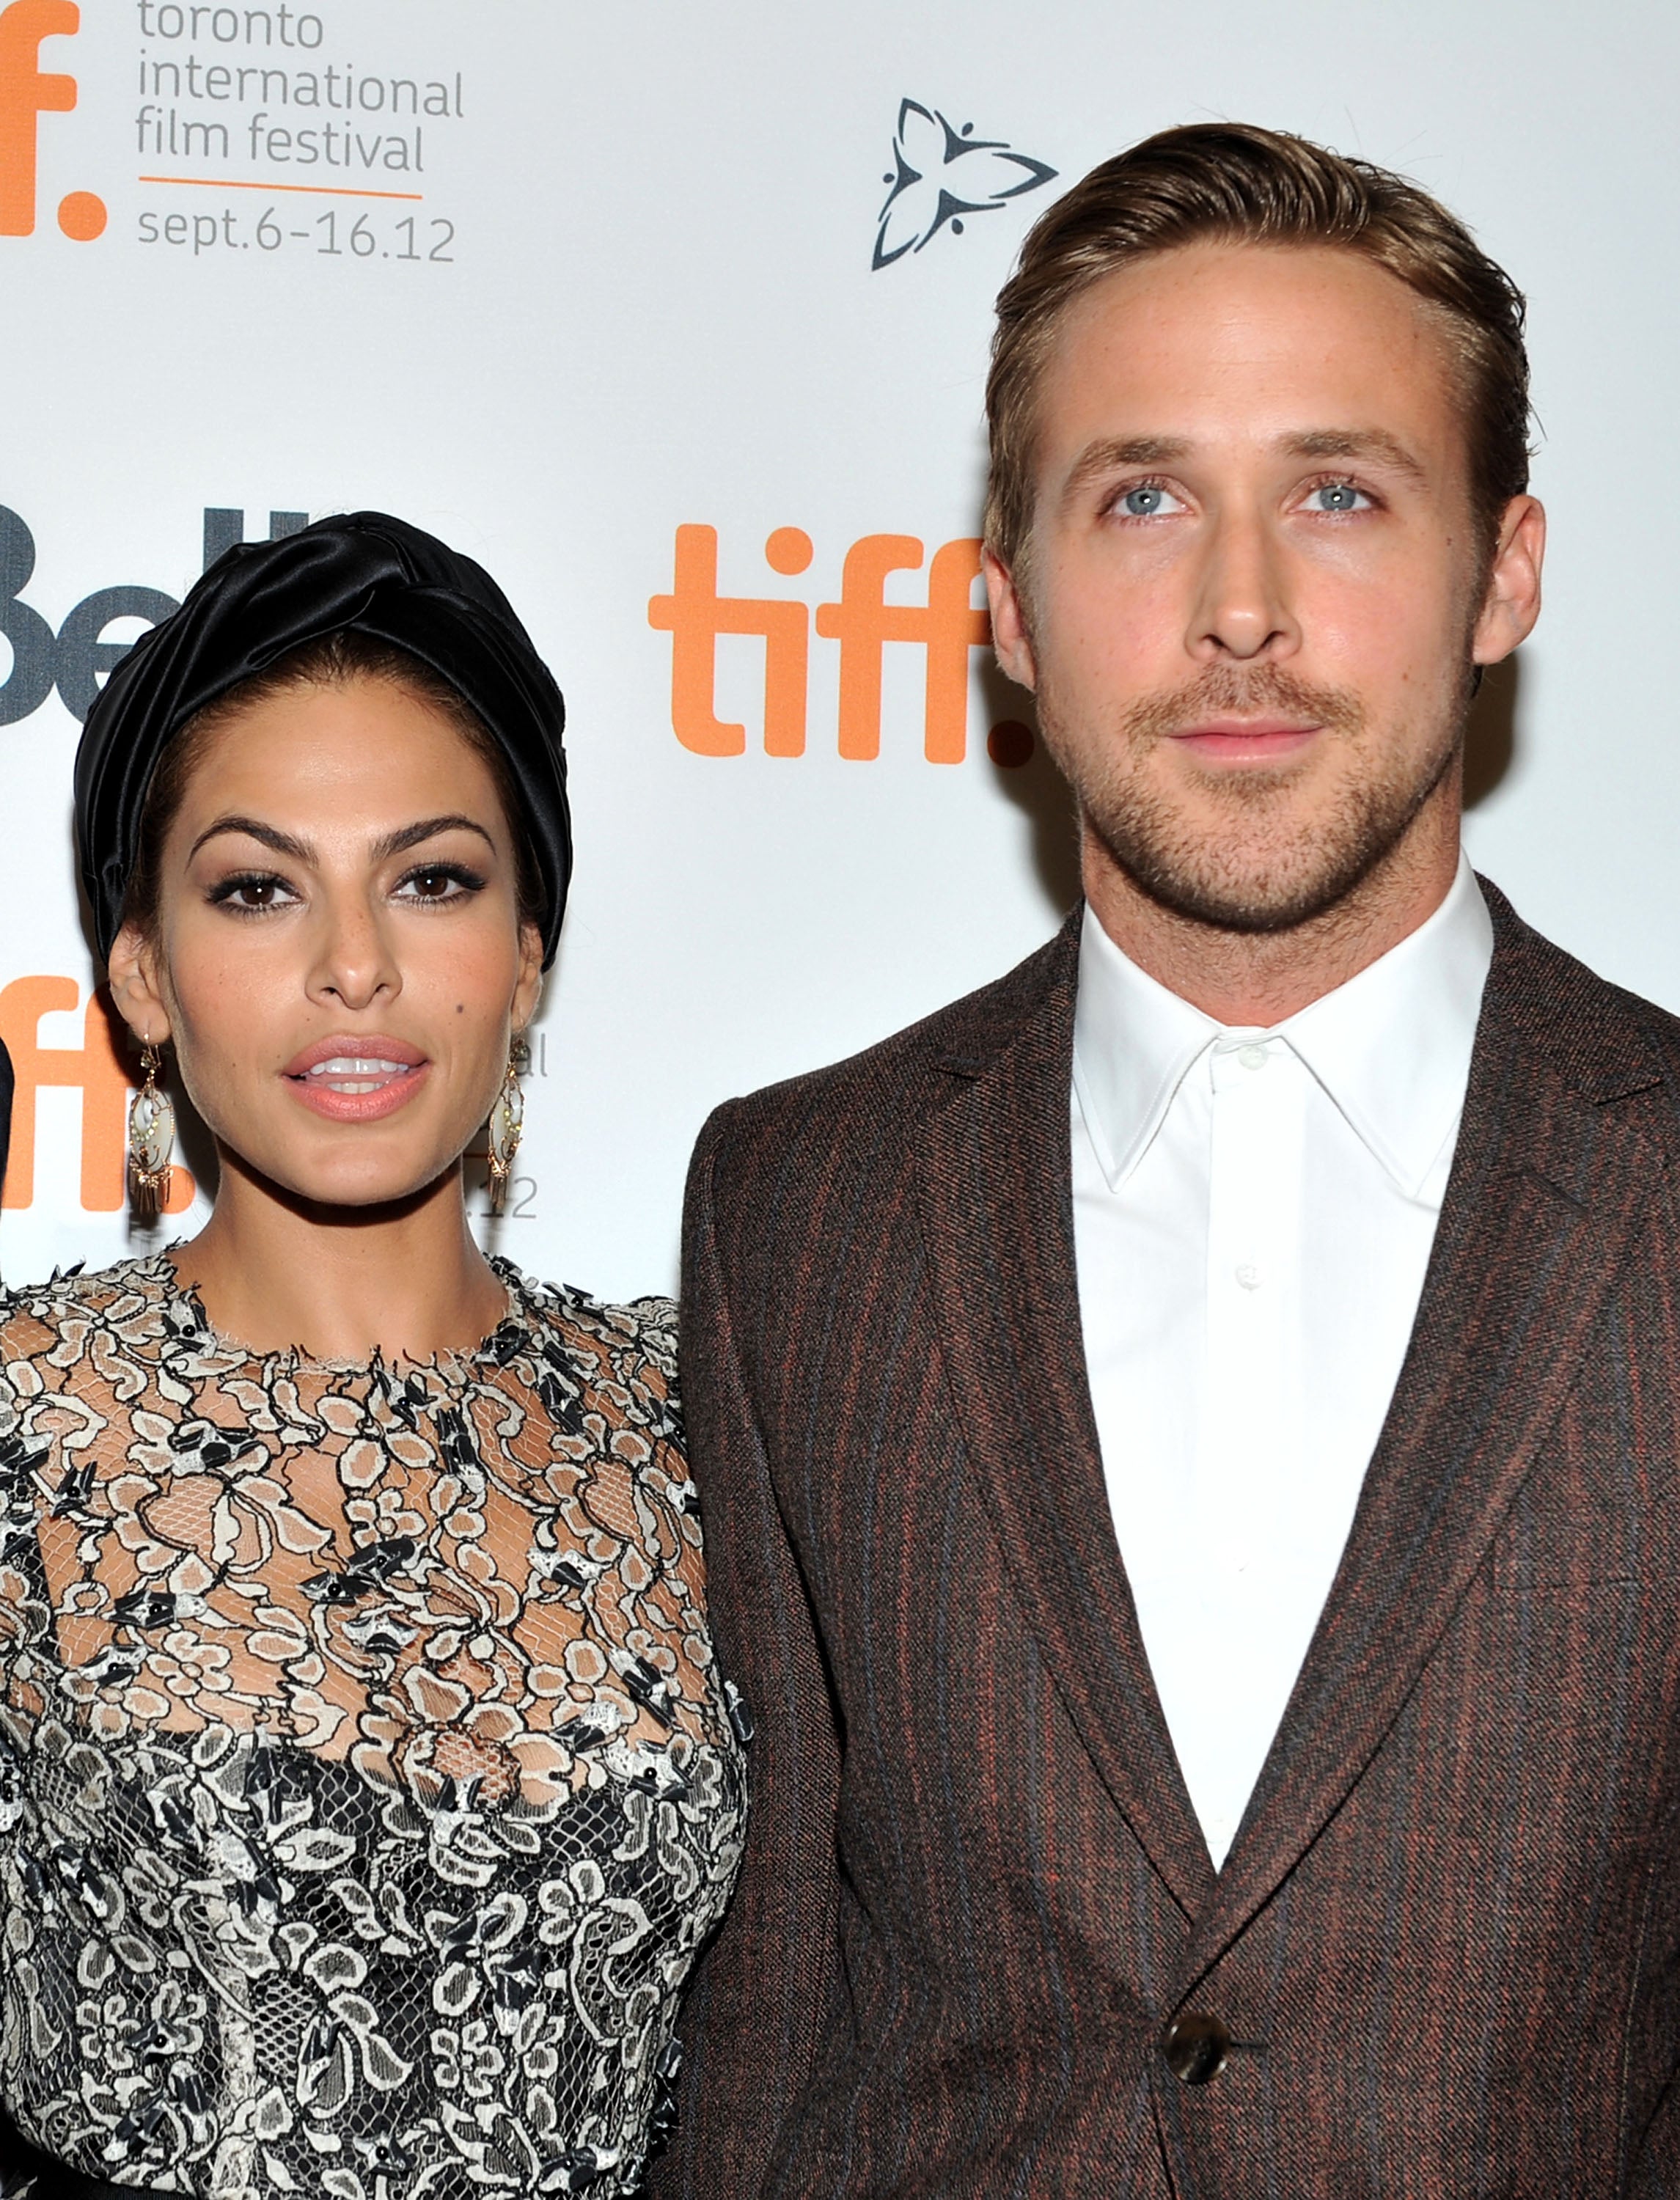 ryan gosling, father's day, eva mendes, ryan gosling reveals the best parts about being a dad for father’s day